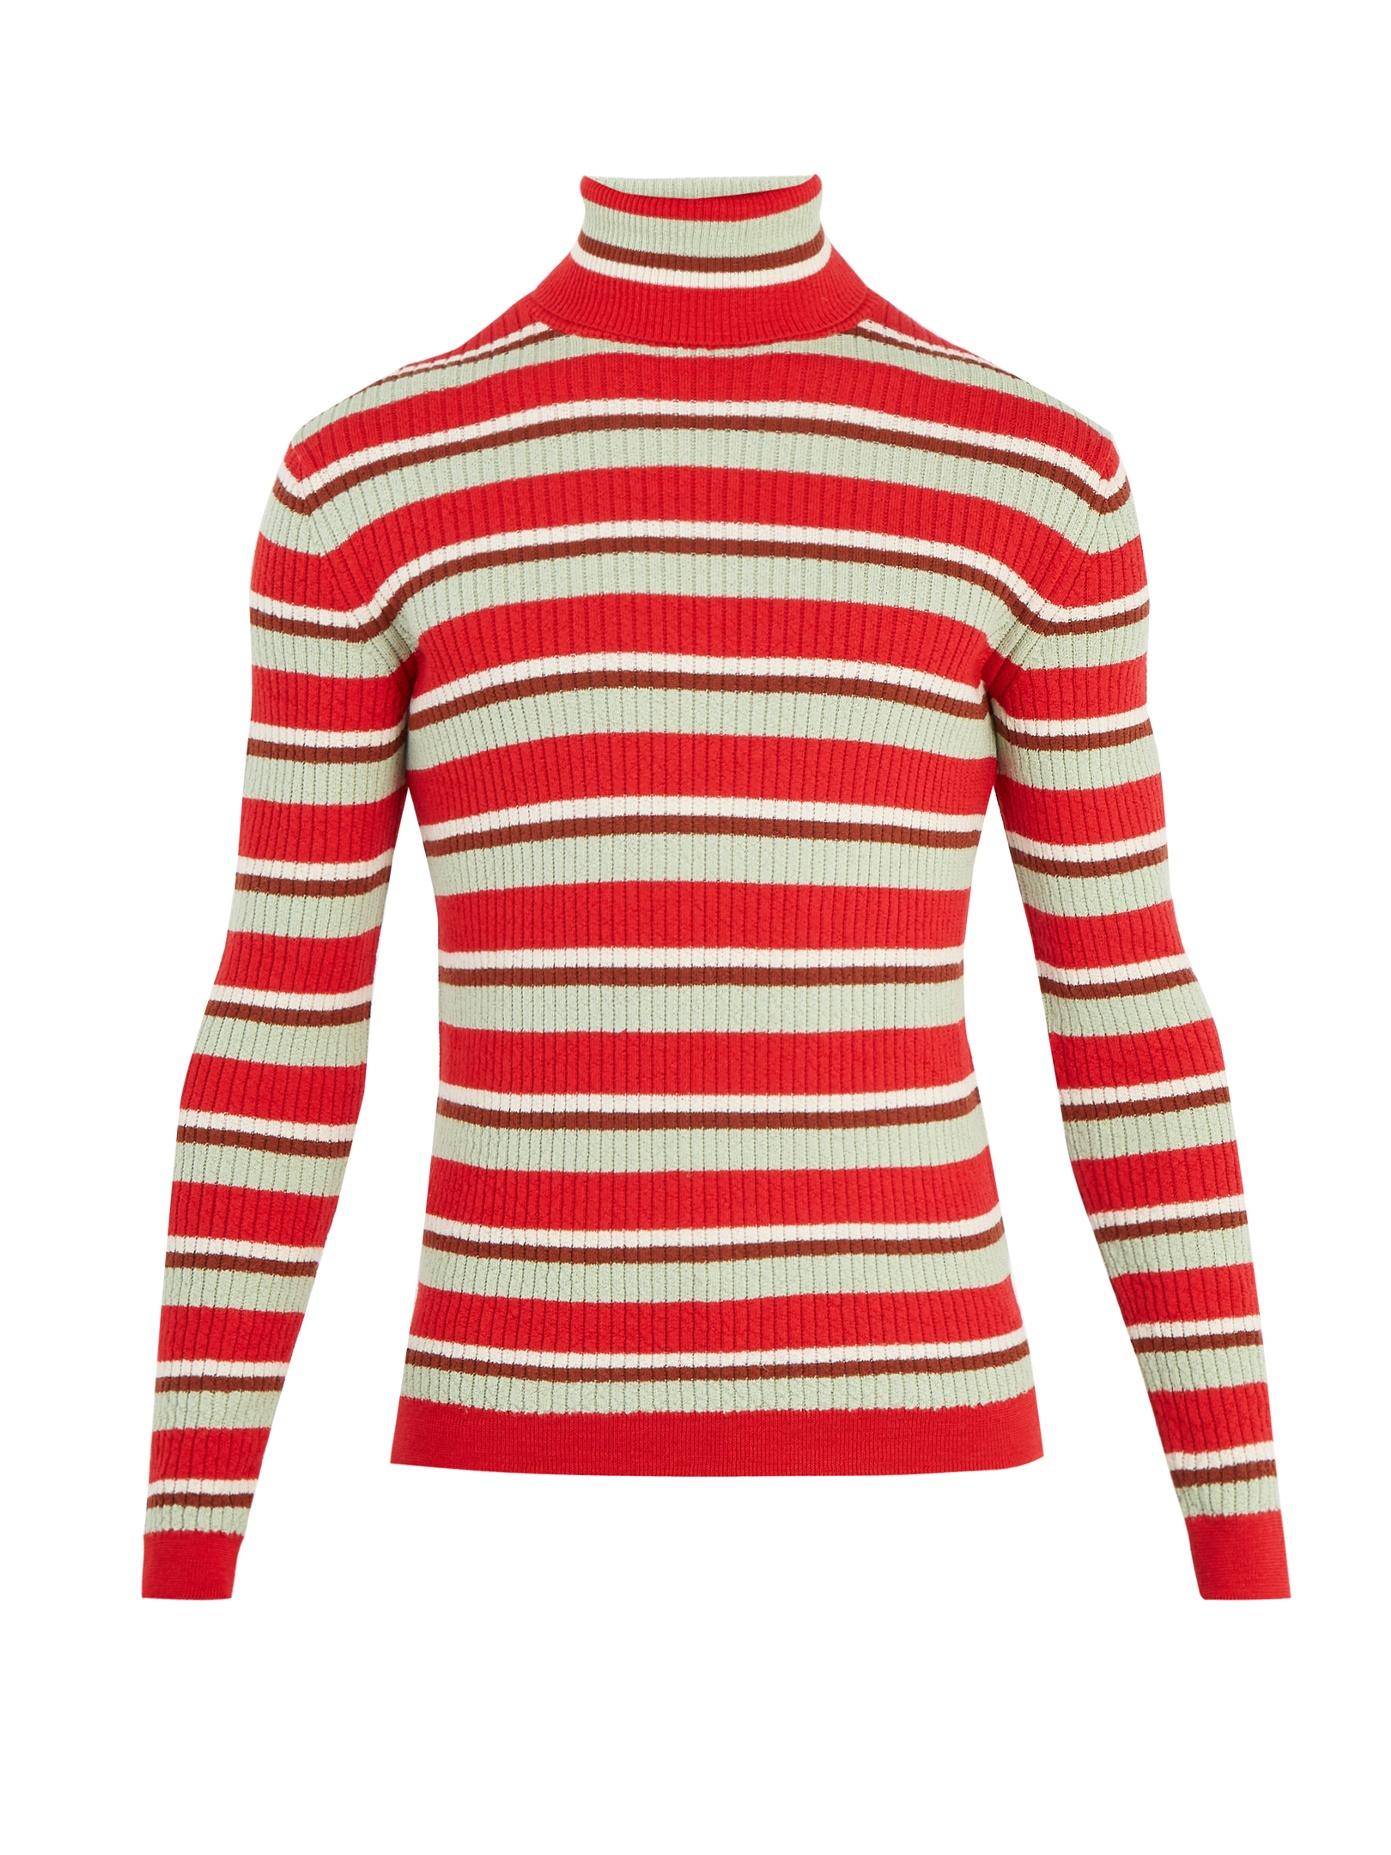 Gucci - Striped Roll Neck Ribbed Knit Wool Sweater - Mens - Red Multi ...